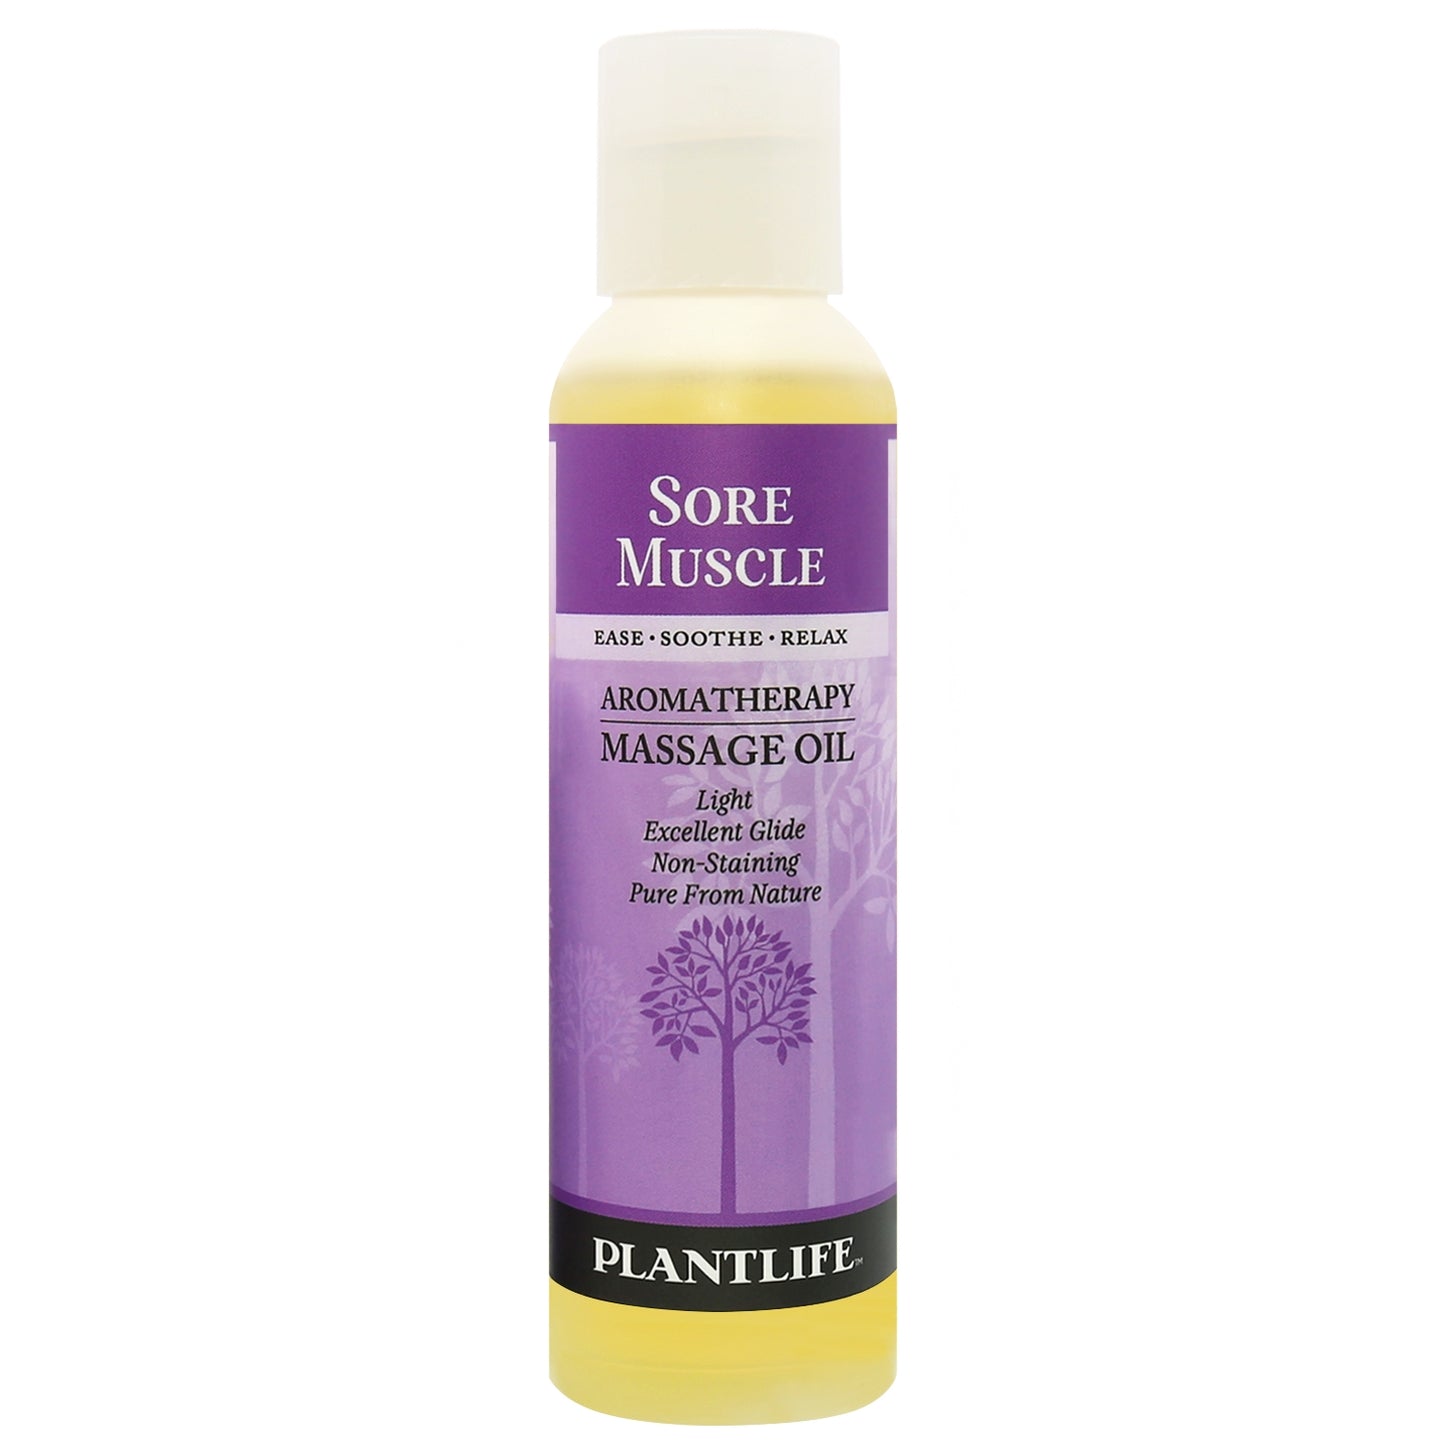 Sore Muscle Plant Based Massage Oil